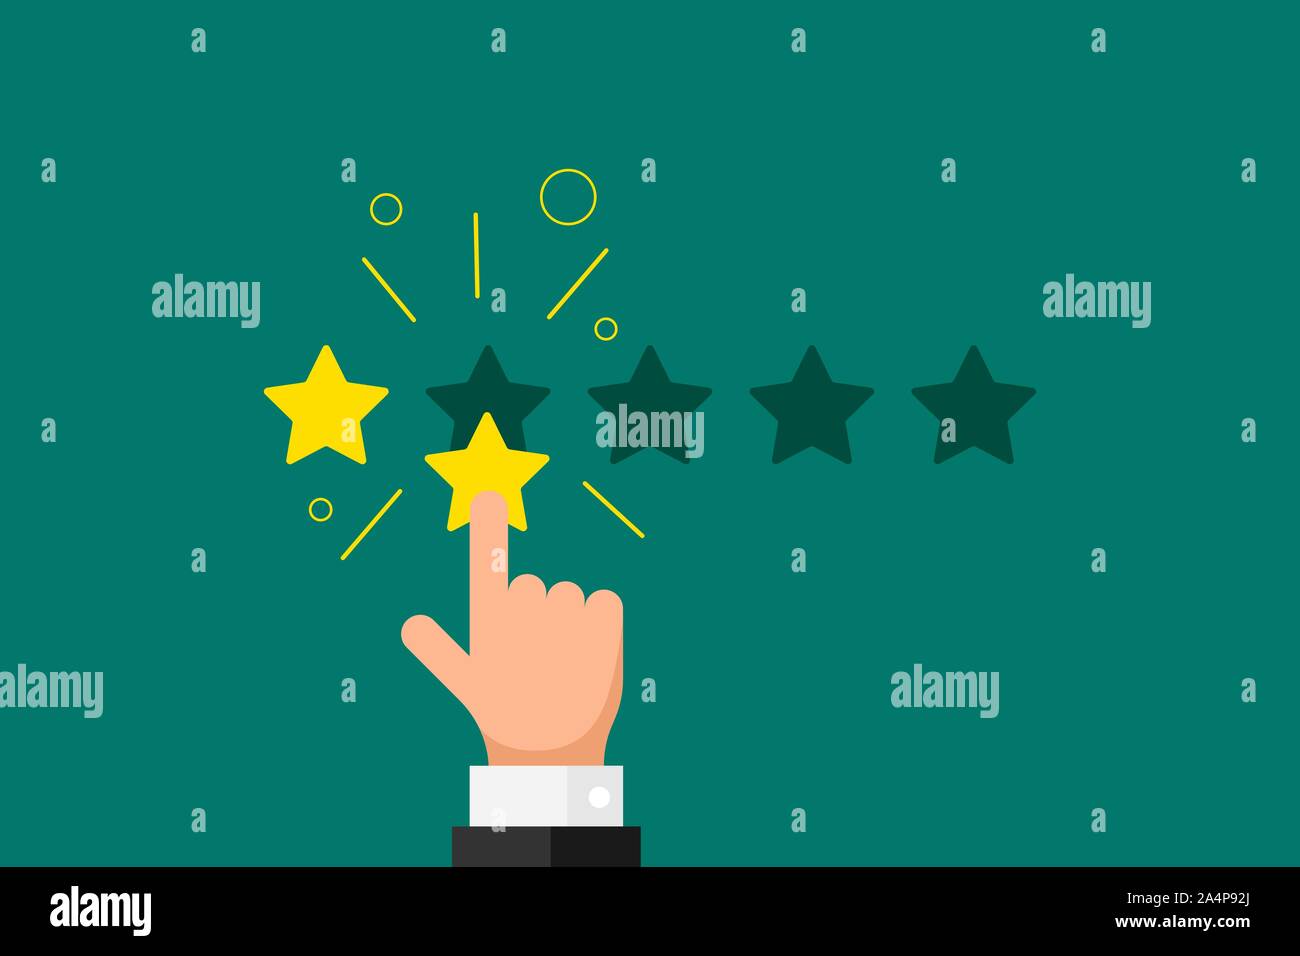 Online feedback reputation bad quality customer review concept flat style. Businessman hand finger pointing 2 two gold star rating on green background. Vector rank vote result eps illustration Stock Vector